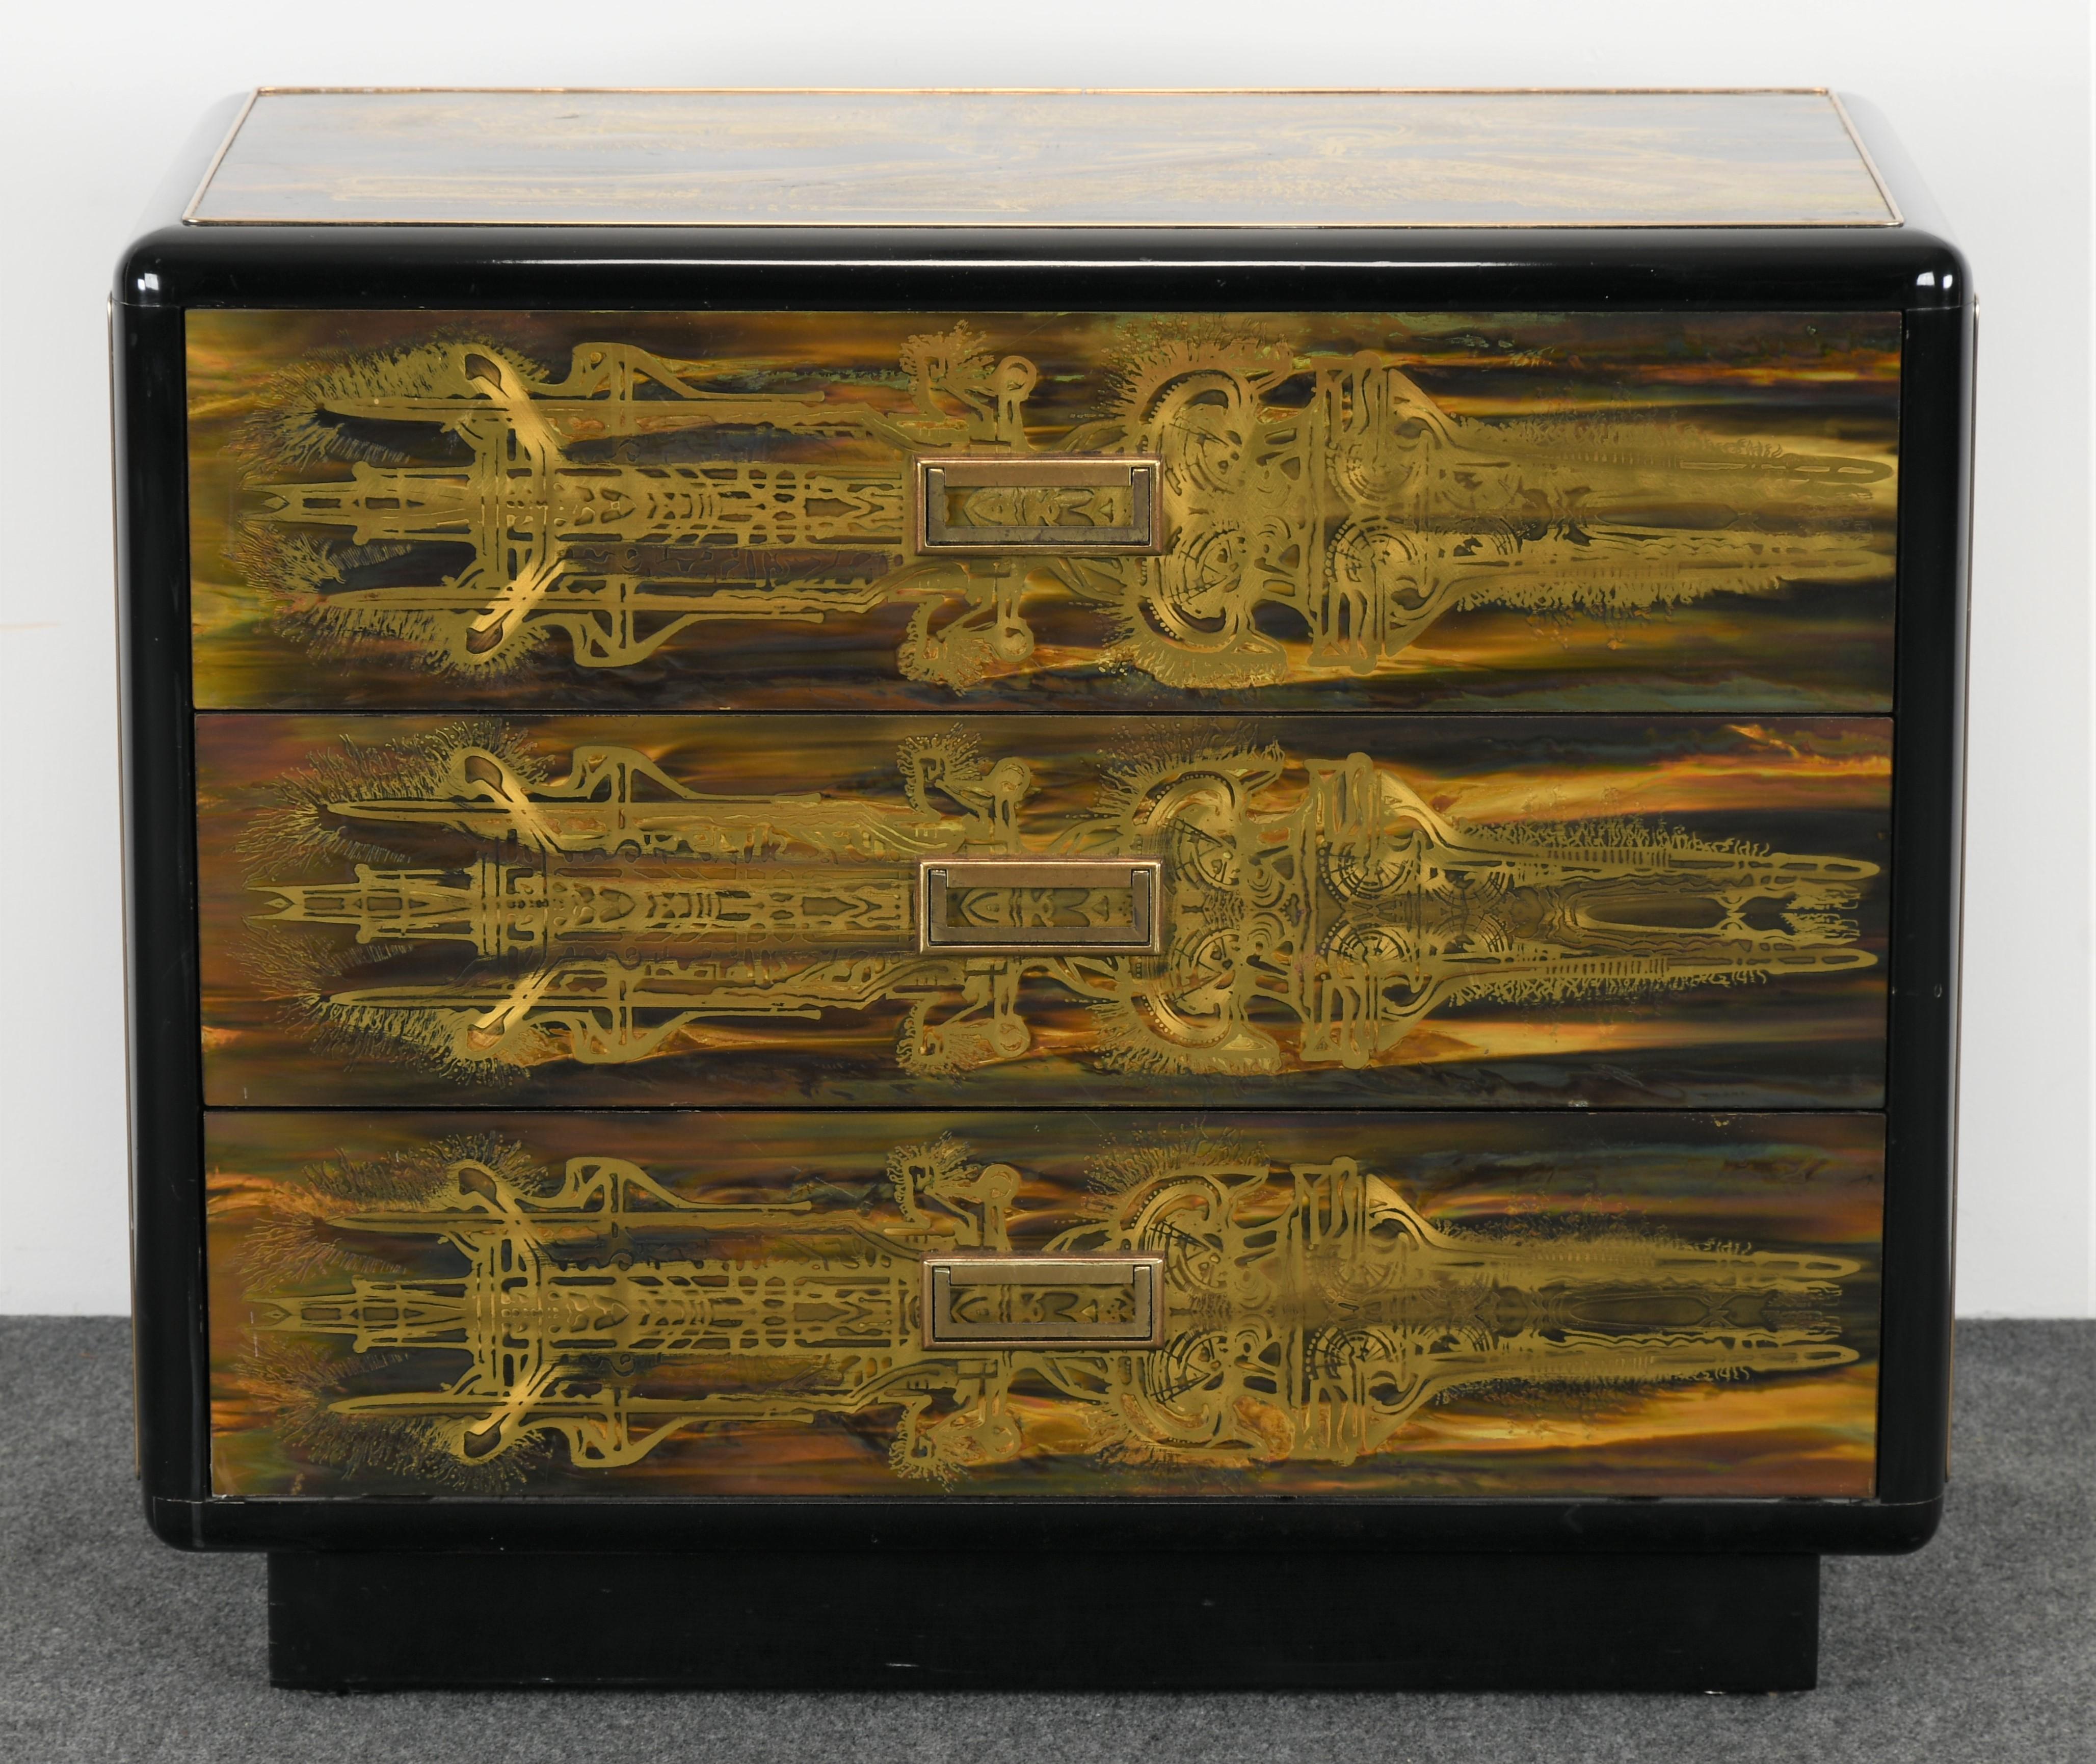 A wonderful Mastercraft chest of drawers by Bernhard Rohne, 1960s. This acid-etched chest can be used almost anywhere because of its great size. It's structurally sound and in very good condition with age-appropriate wear.

Dimensions: 27